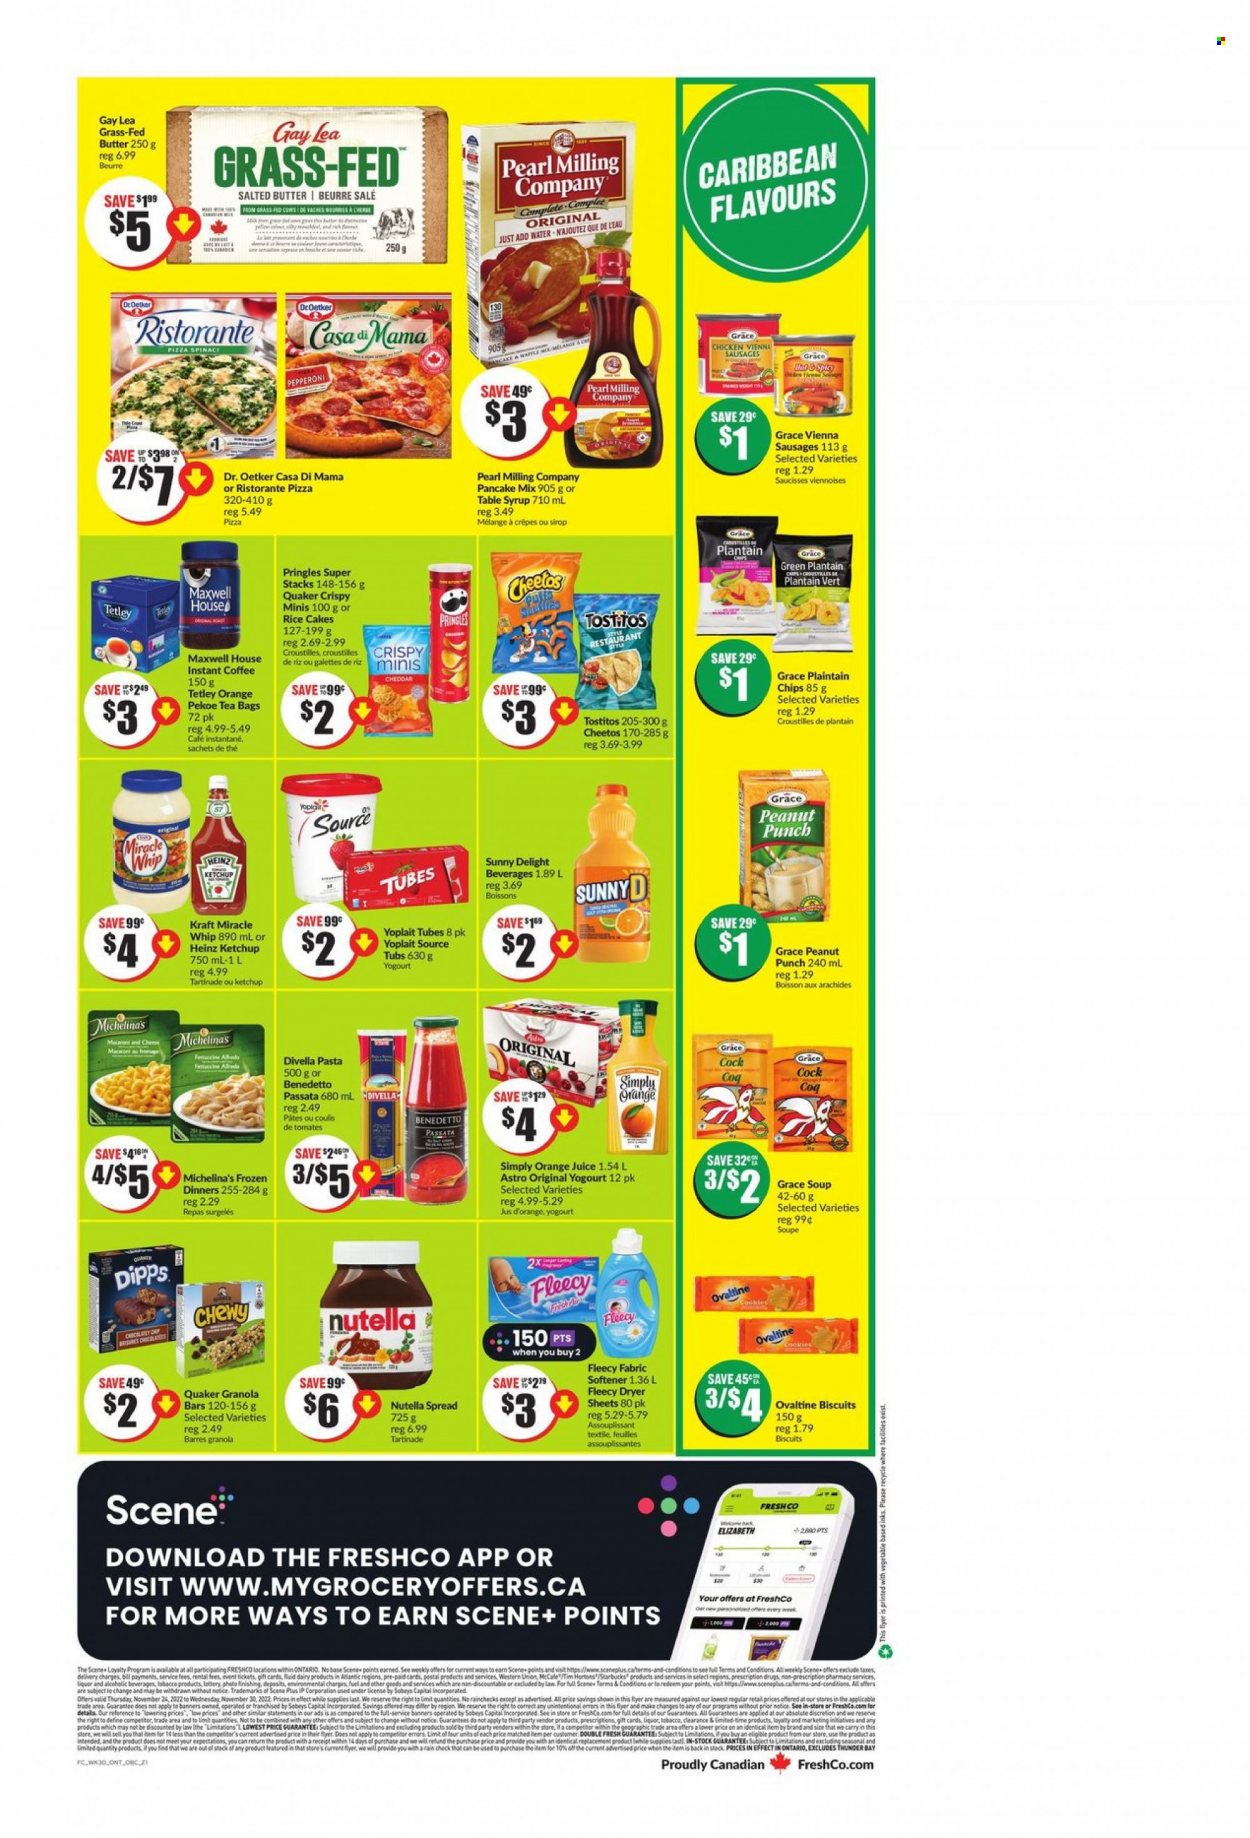 thumbnail - FreshCo. Flyer - November 24, 2022 - November 30, 2022 - Sales products - cake, rice cakes, pancake mix, pizza, pasta, Quaker, Kraft®, sausage, vienna sausage, Dr. Oetker, yoghurt, Yoplait, snack bar, butter, salted butter, mayonnaise, Miracle Whip, cereal bar, biscuit, breakfast bar, bars, Pringles, Cheetos, chips, Tostitos, rice crisps, salty snack, tomato sauce, granola bar, ketchup, orange juice, juice, fruit drink, water, Maxwell House, tea bags, coffee, instant coffee, fabric softener, dryer sheets, Heinz, Nutella. Page 4.